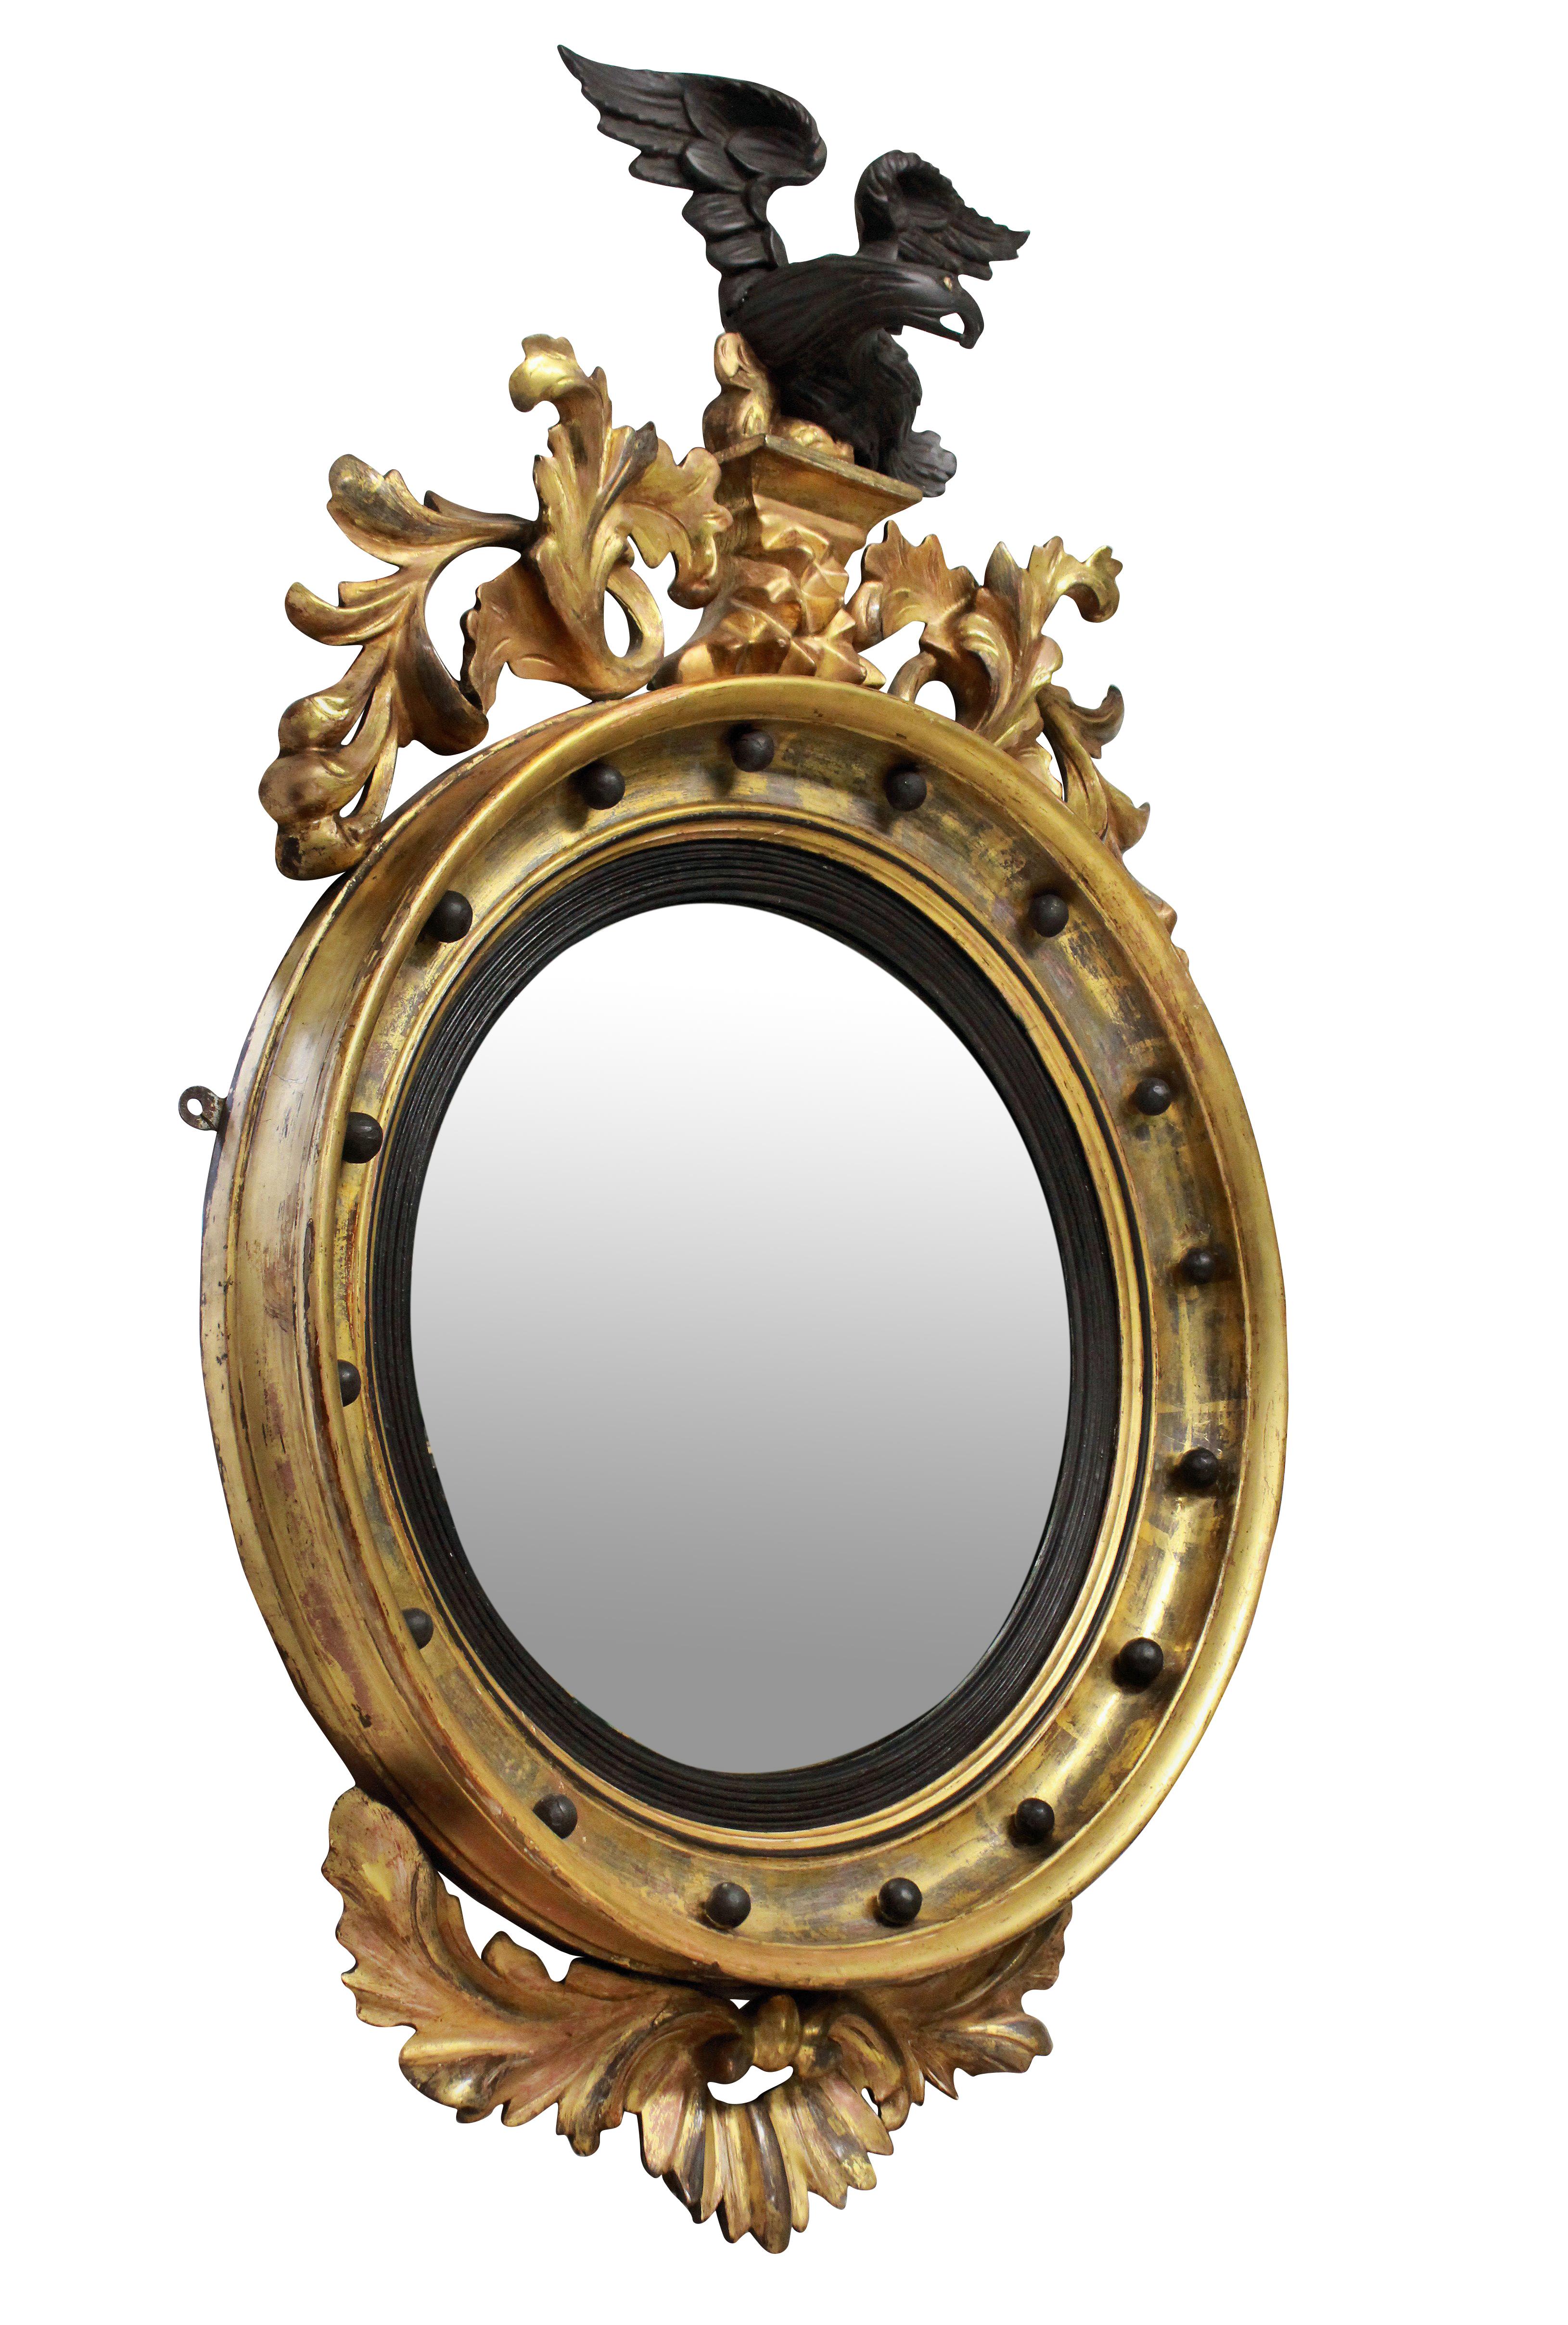 A lovely 19th century circular gilded convex mirror with ebonized slip, surmounted with an ebonized cresting carved eagle with a carved foliate apron.
 